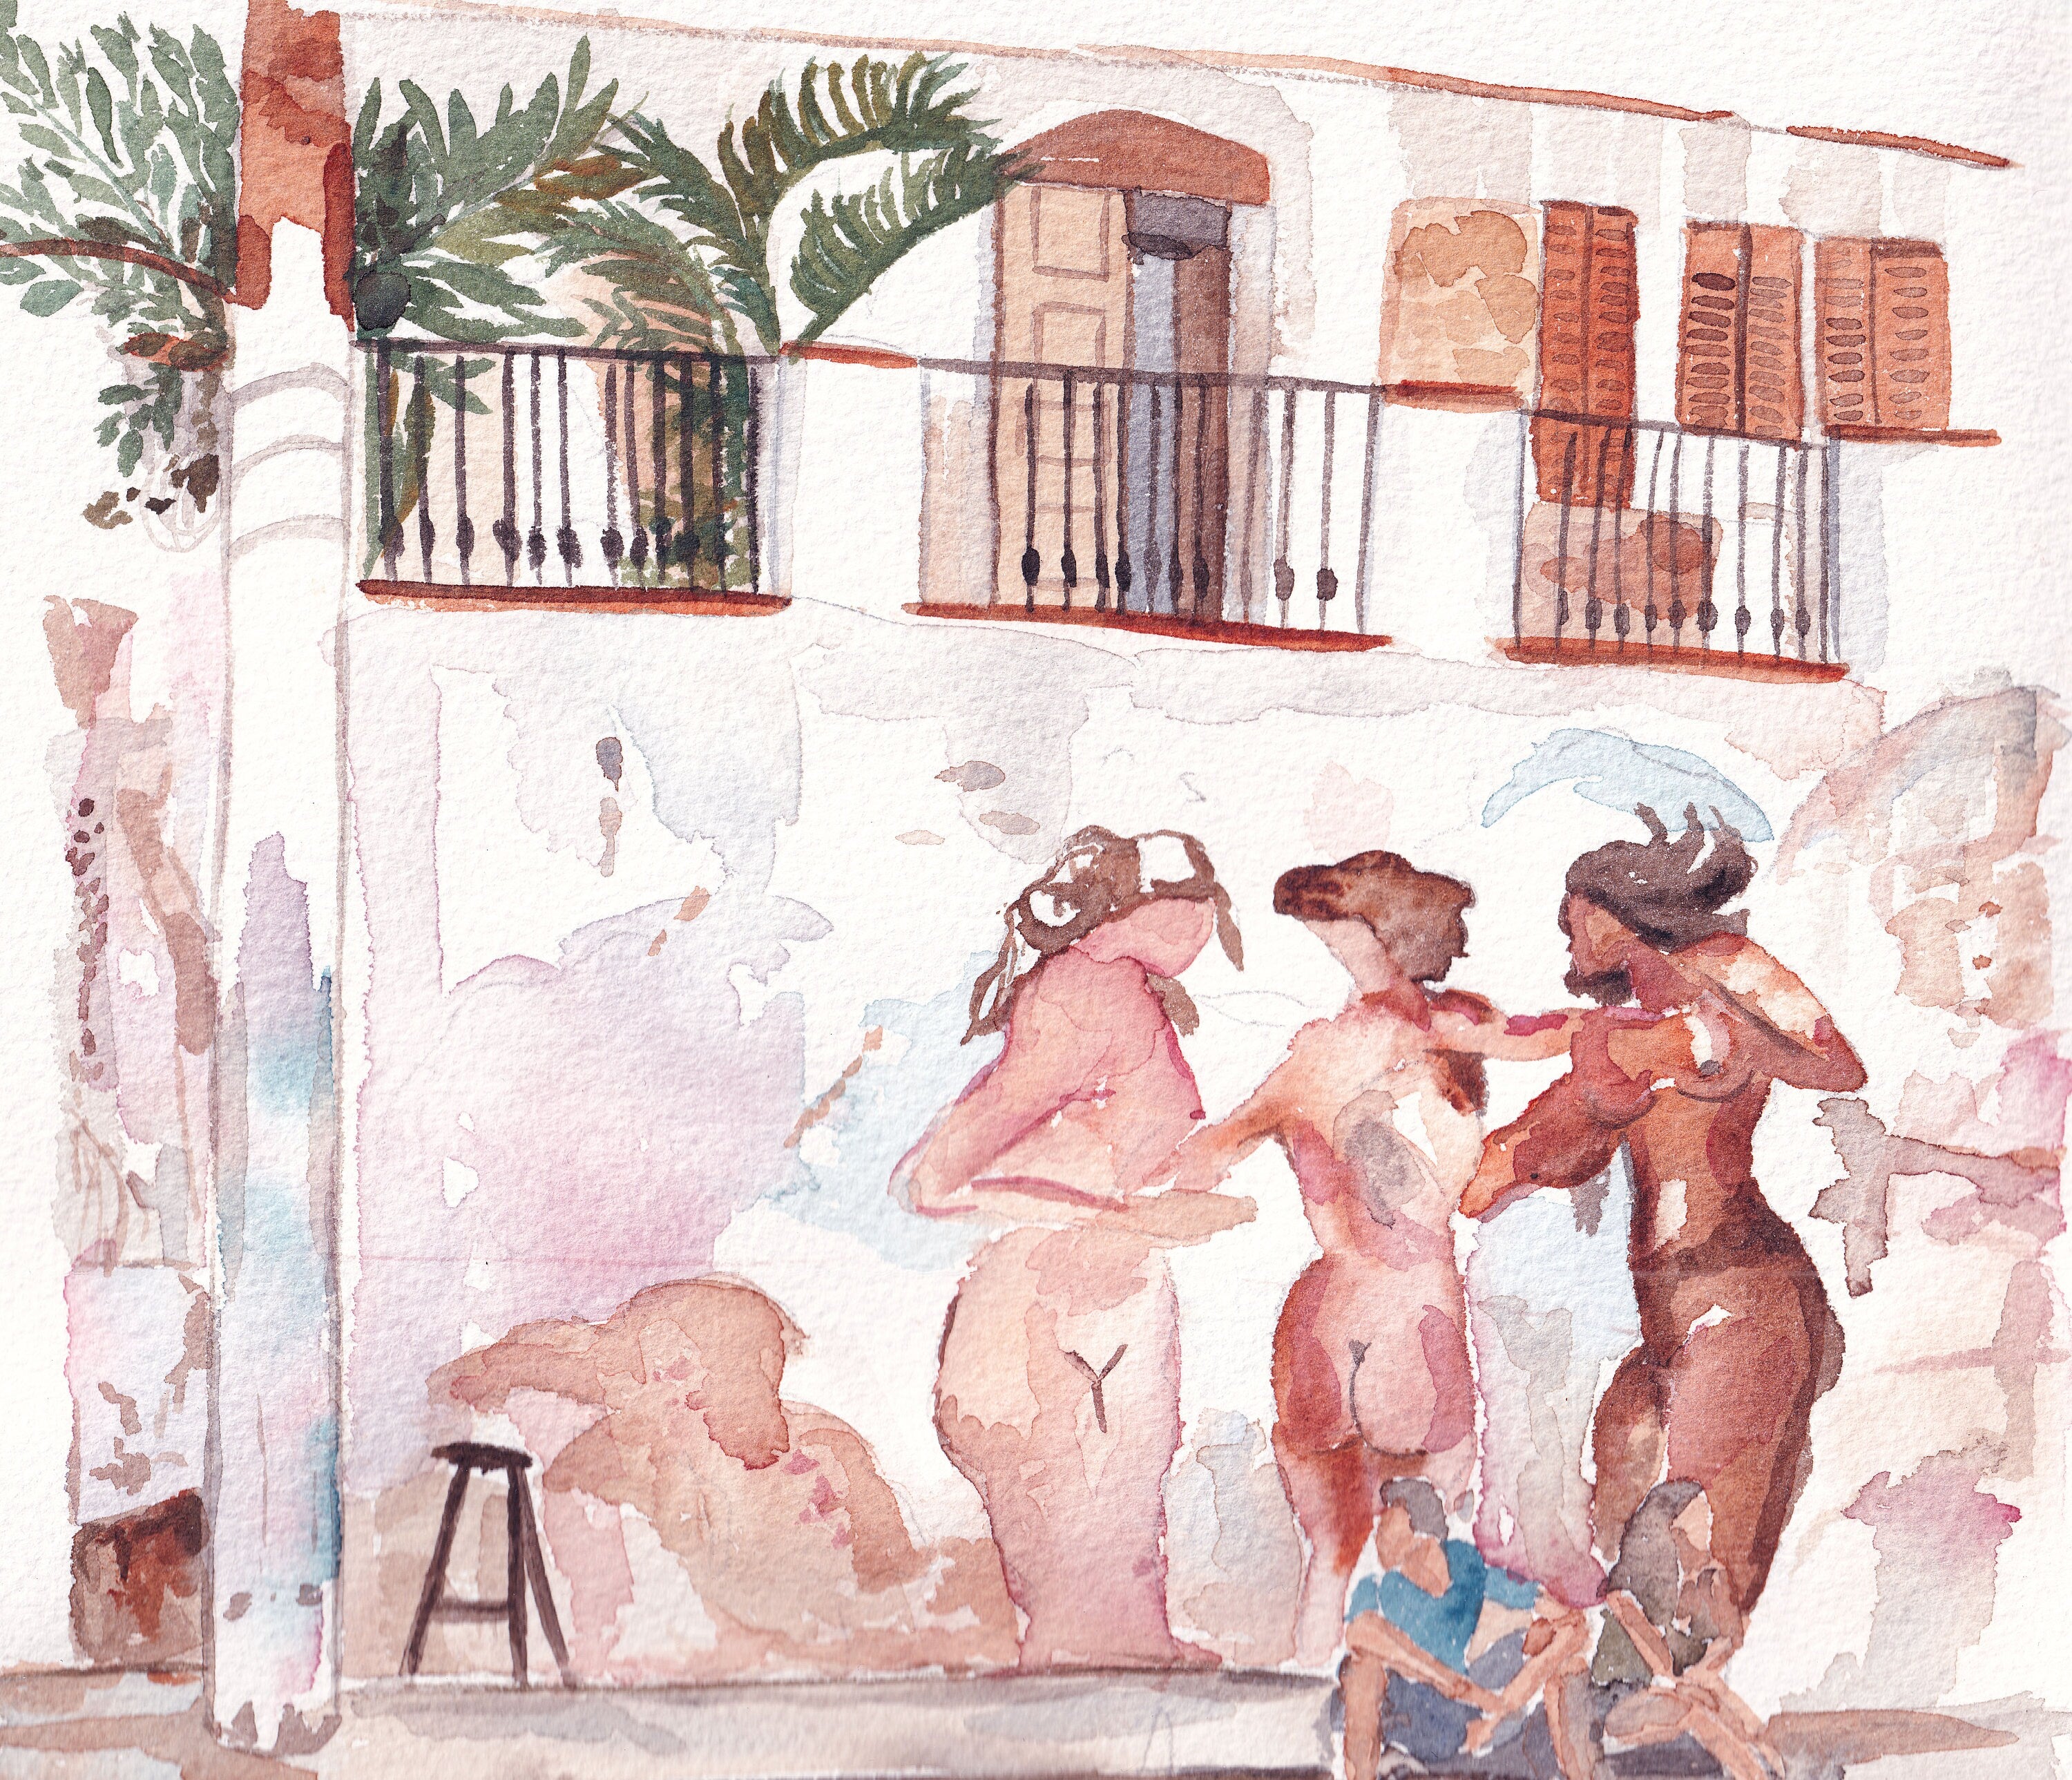 Rio De Janeiro Streetscape - Painted Ladies print of painting by Medjool Studio. Print of original gouache painting of a Brazilian streetscape. Inspired by beautiful murals in Rio de Janeiro.